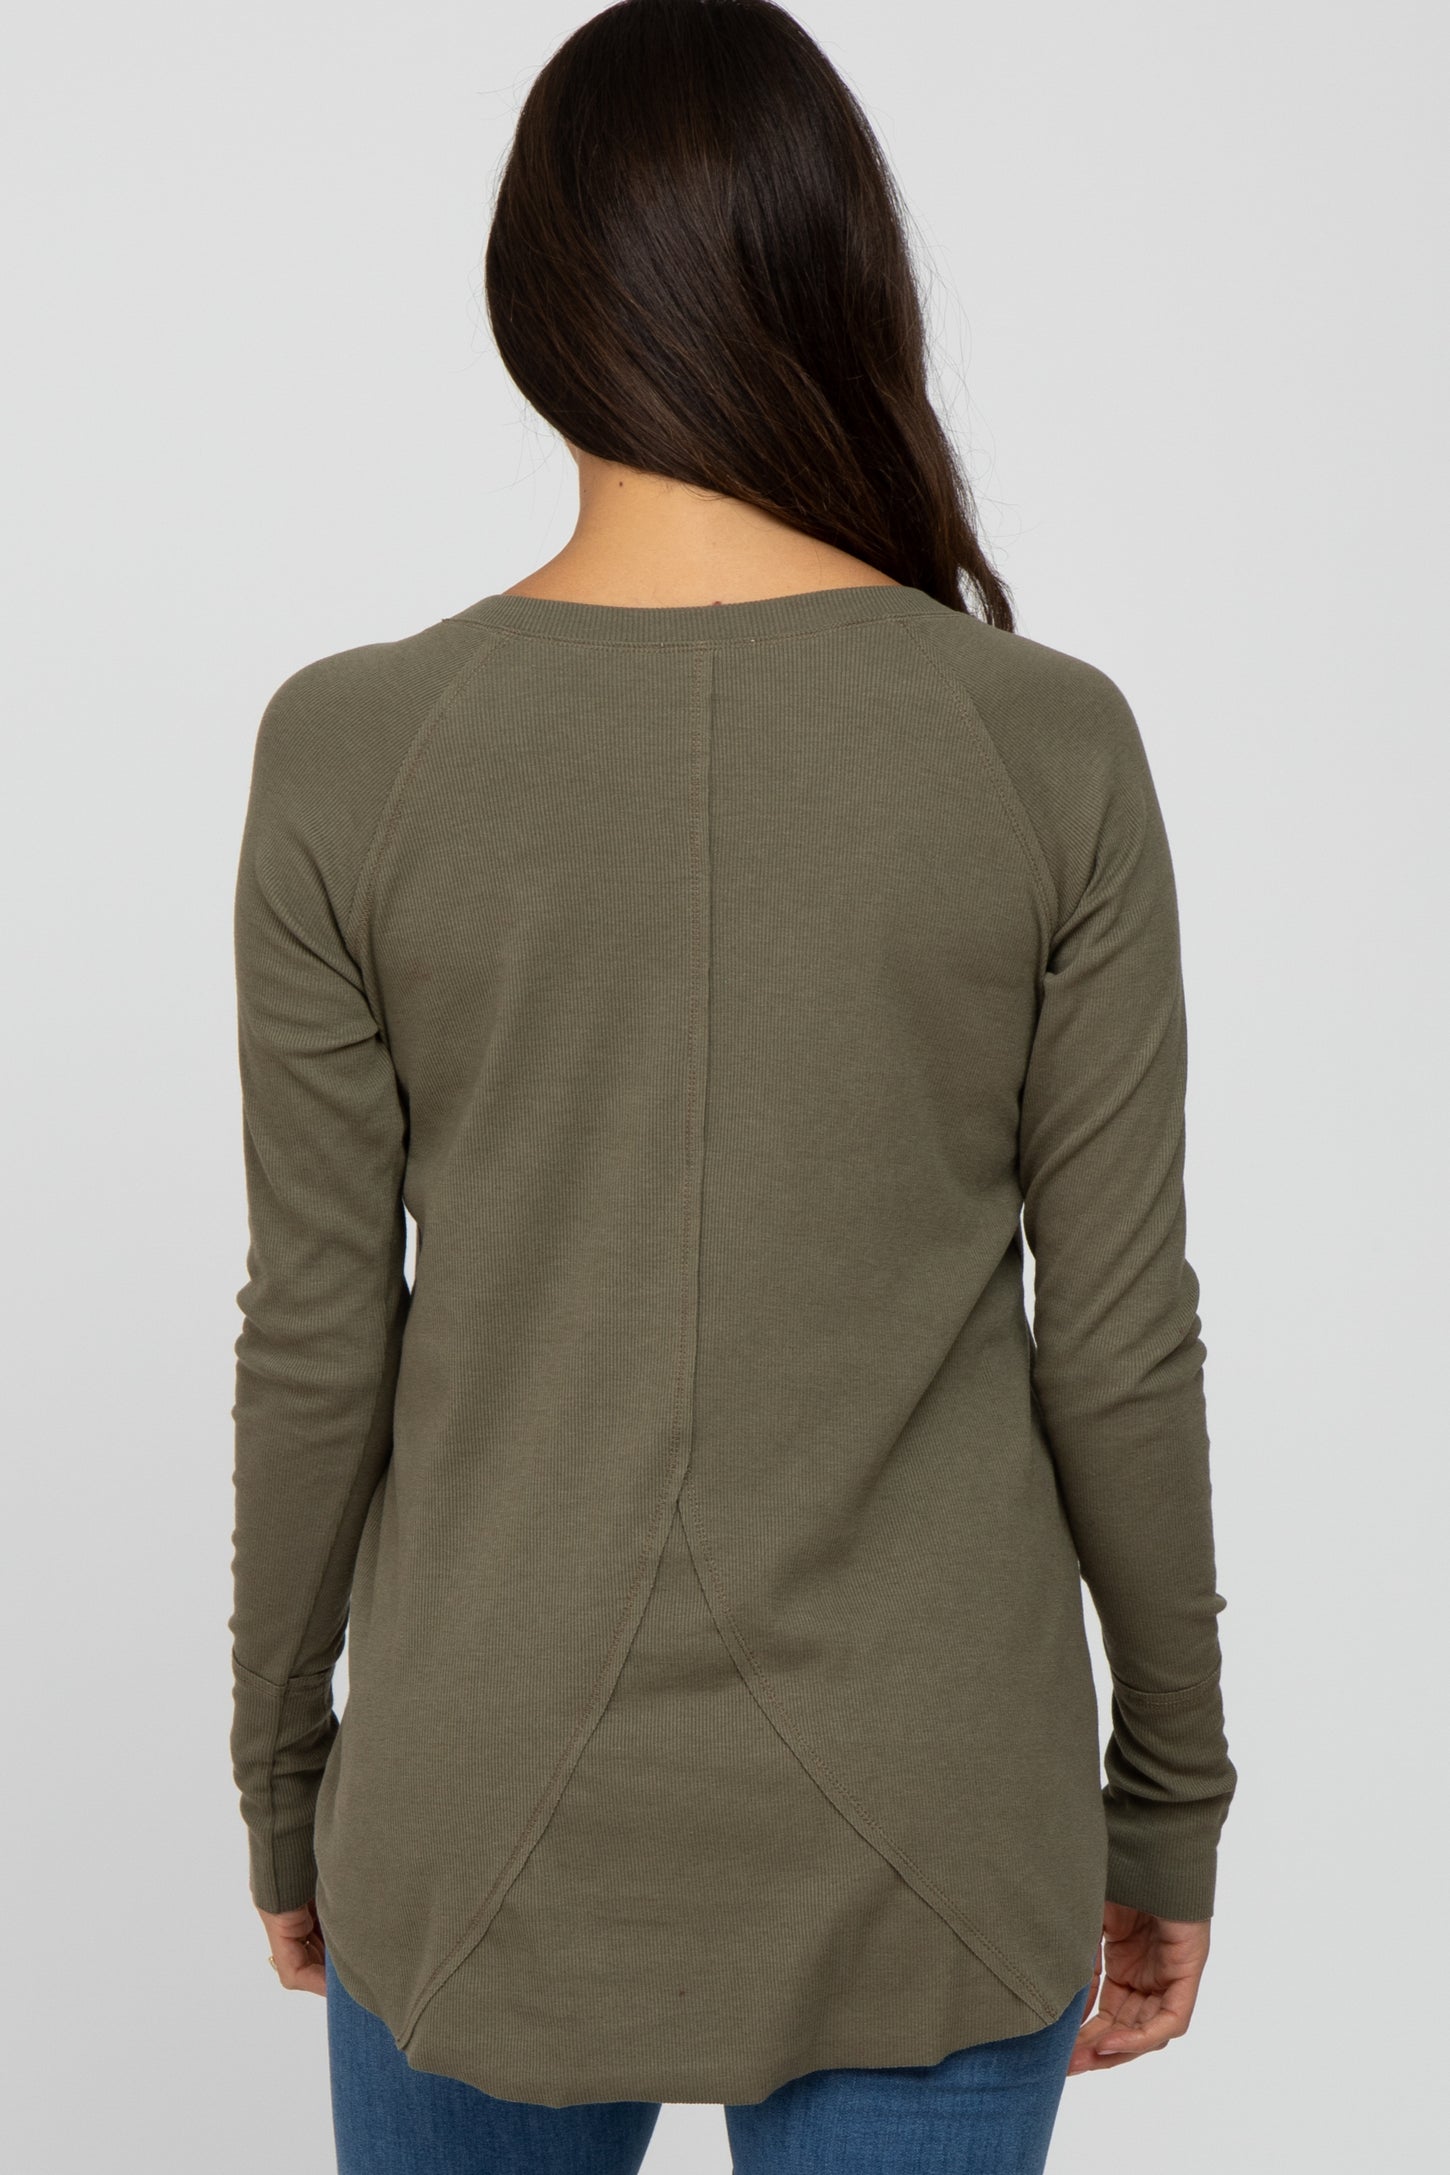 Olive Solid Ribbed Long Sleeve Top